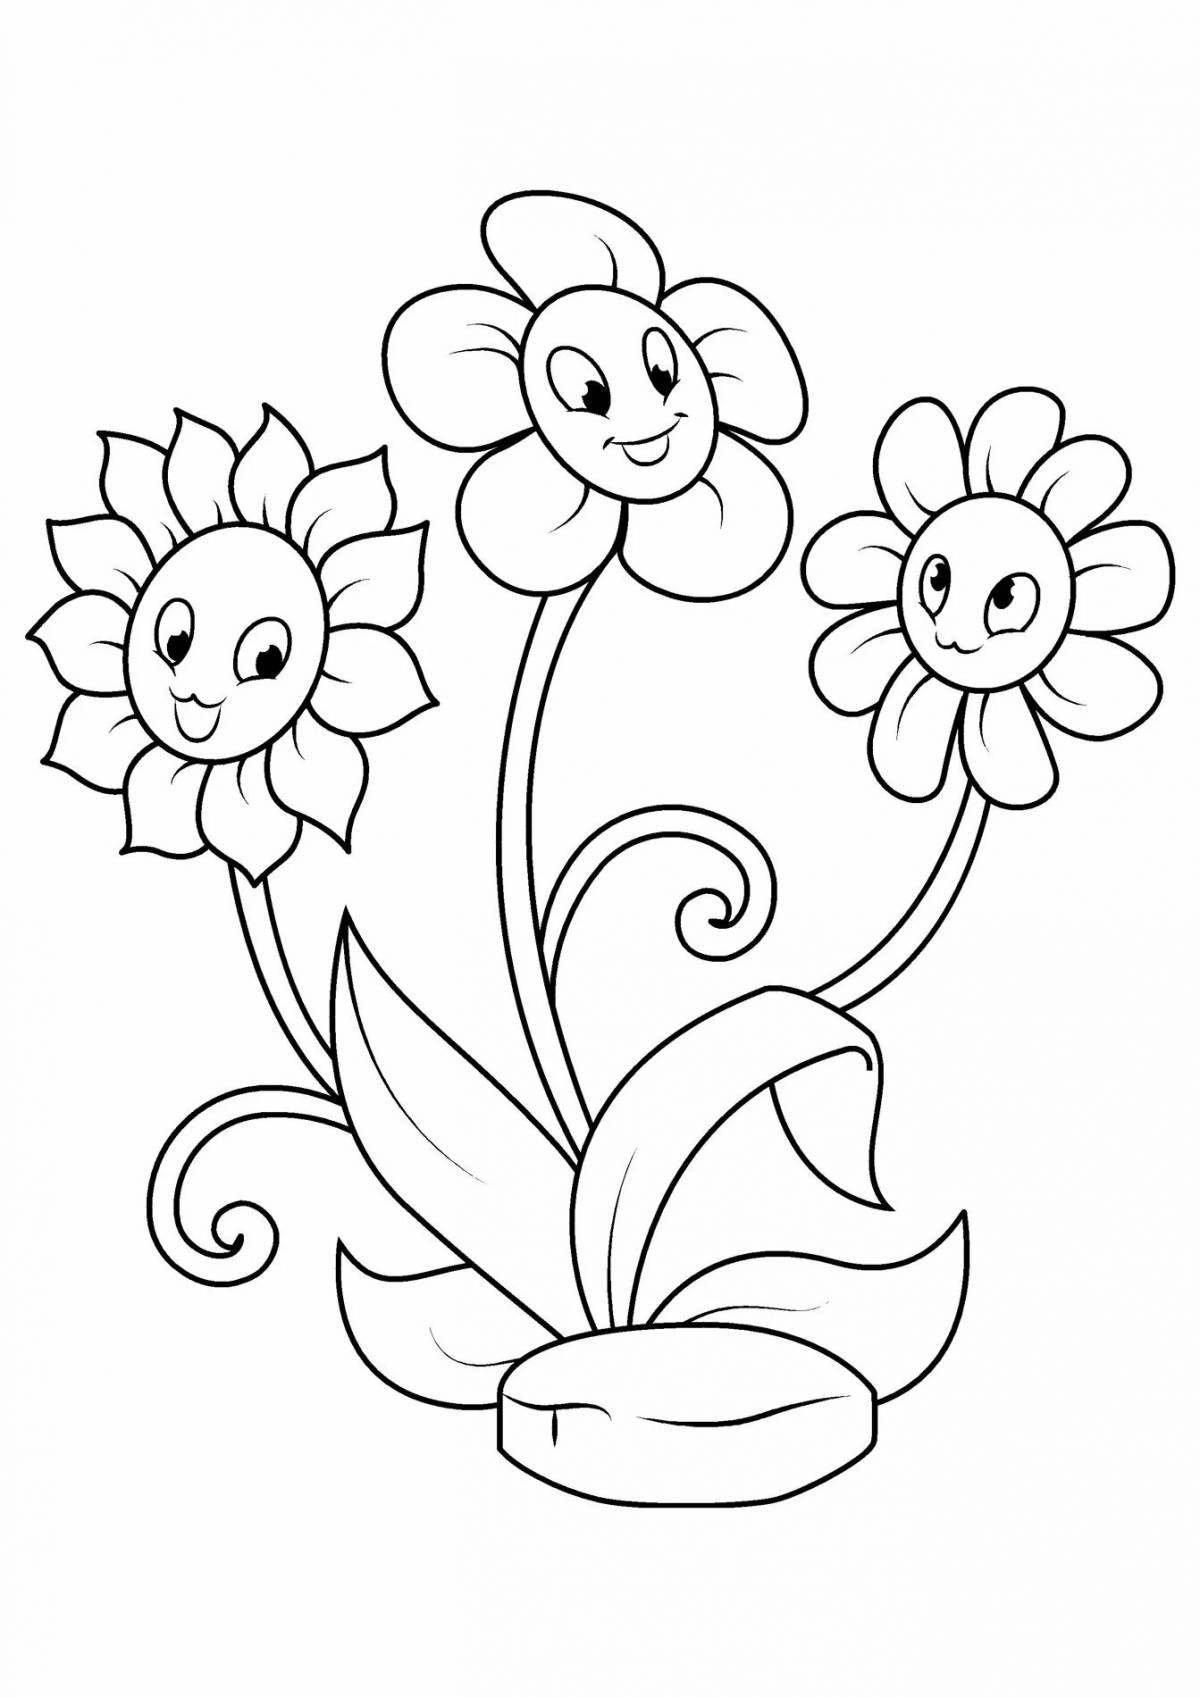 Luminous flower coloring book for children 5-6 years old